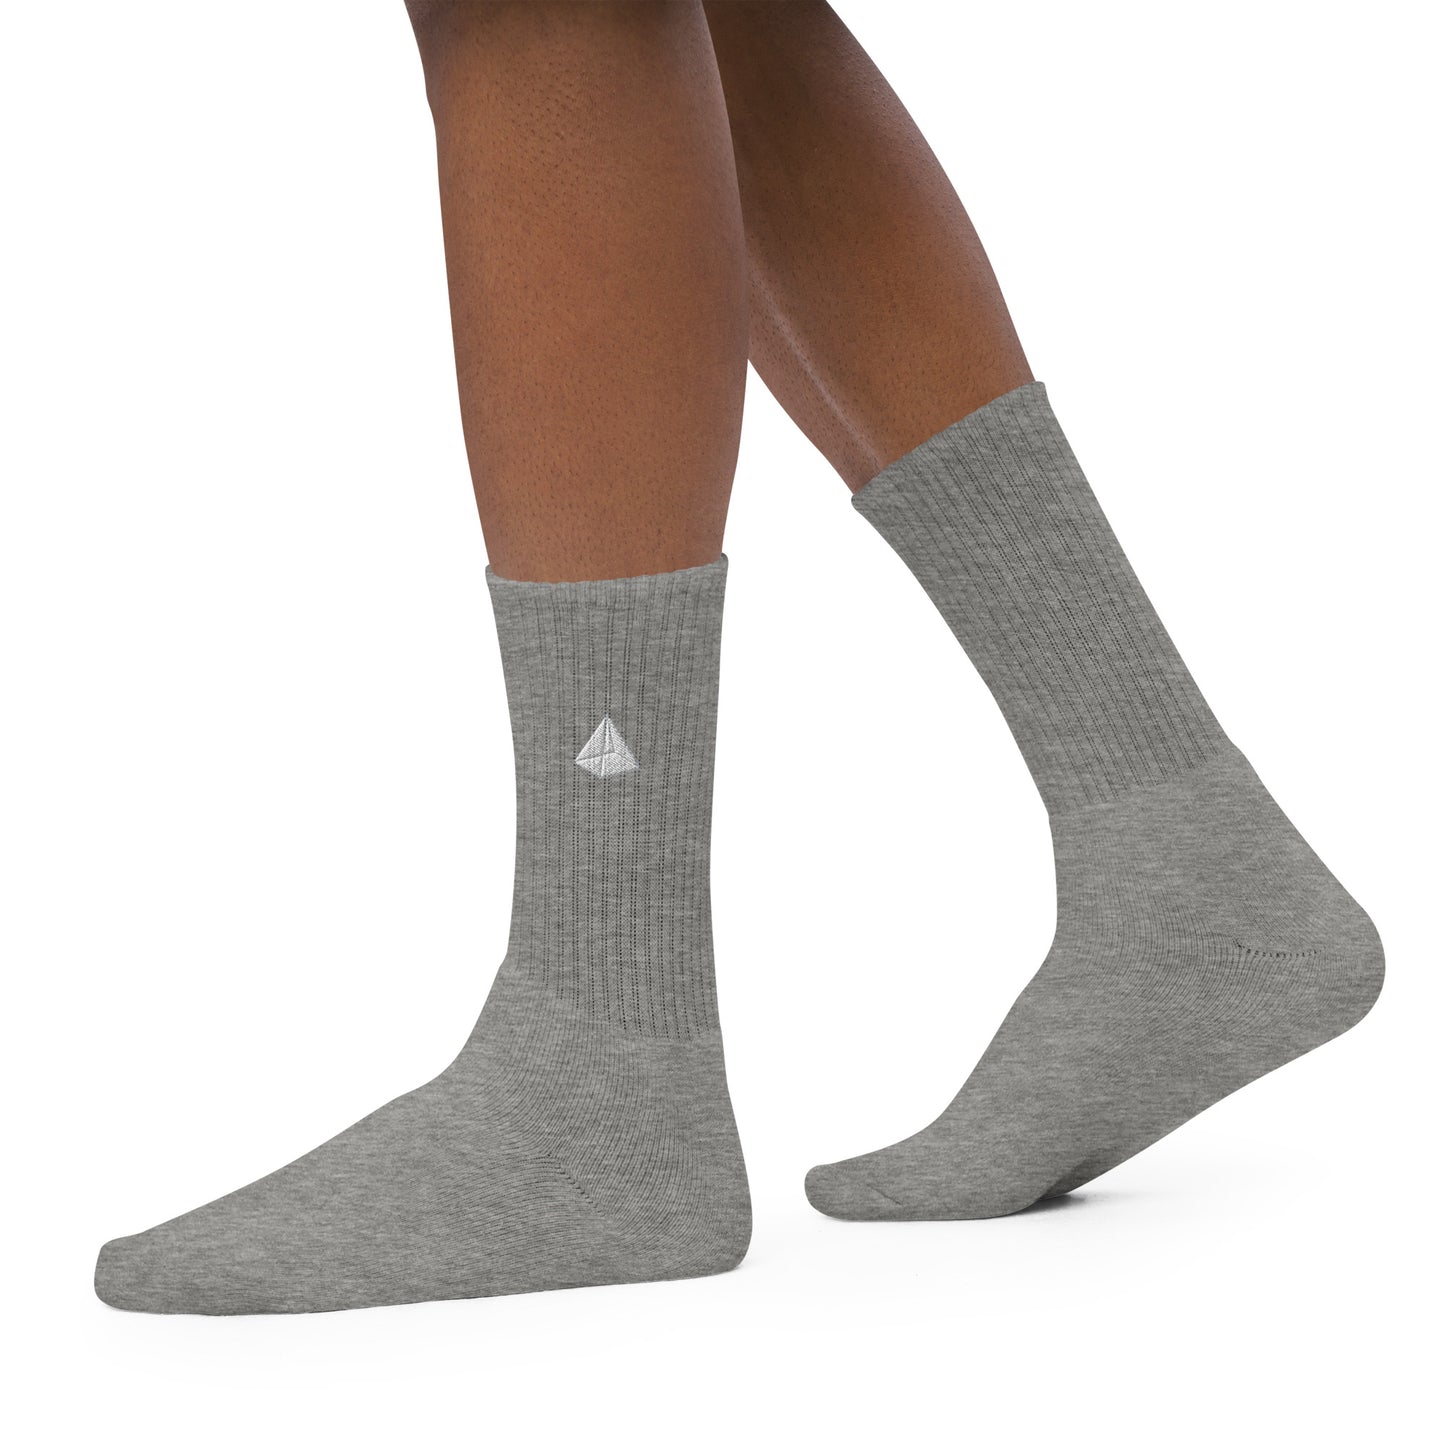 socks-from-the-side-with-pyramid-symbol